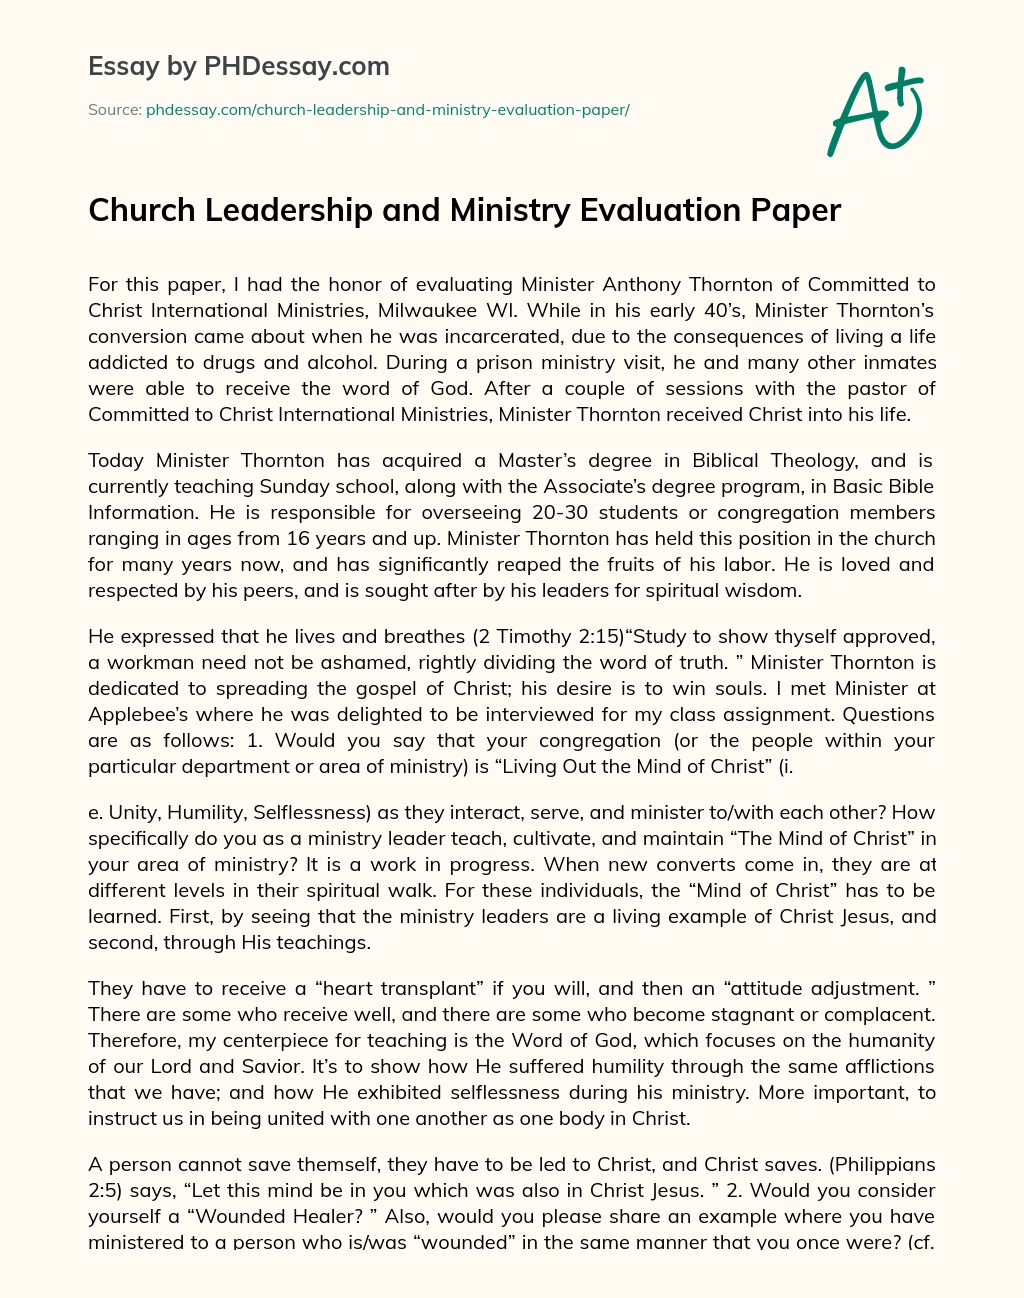 Church Leadership and Ministry Evaluation Paper essay